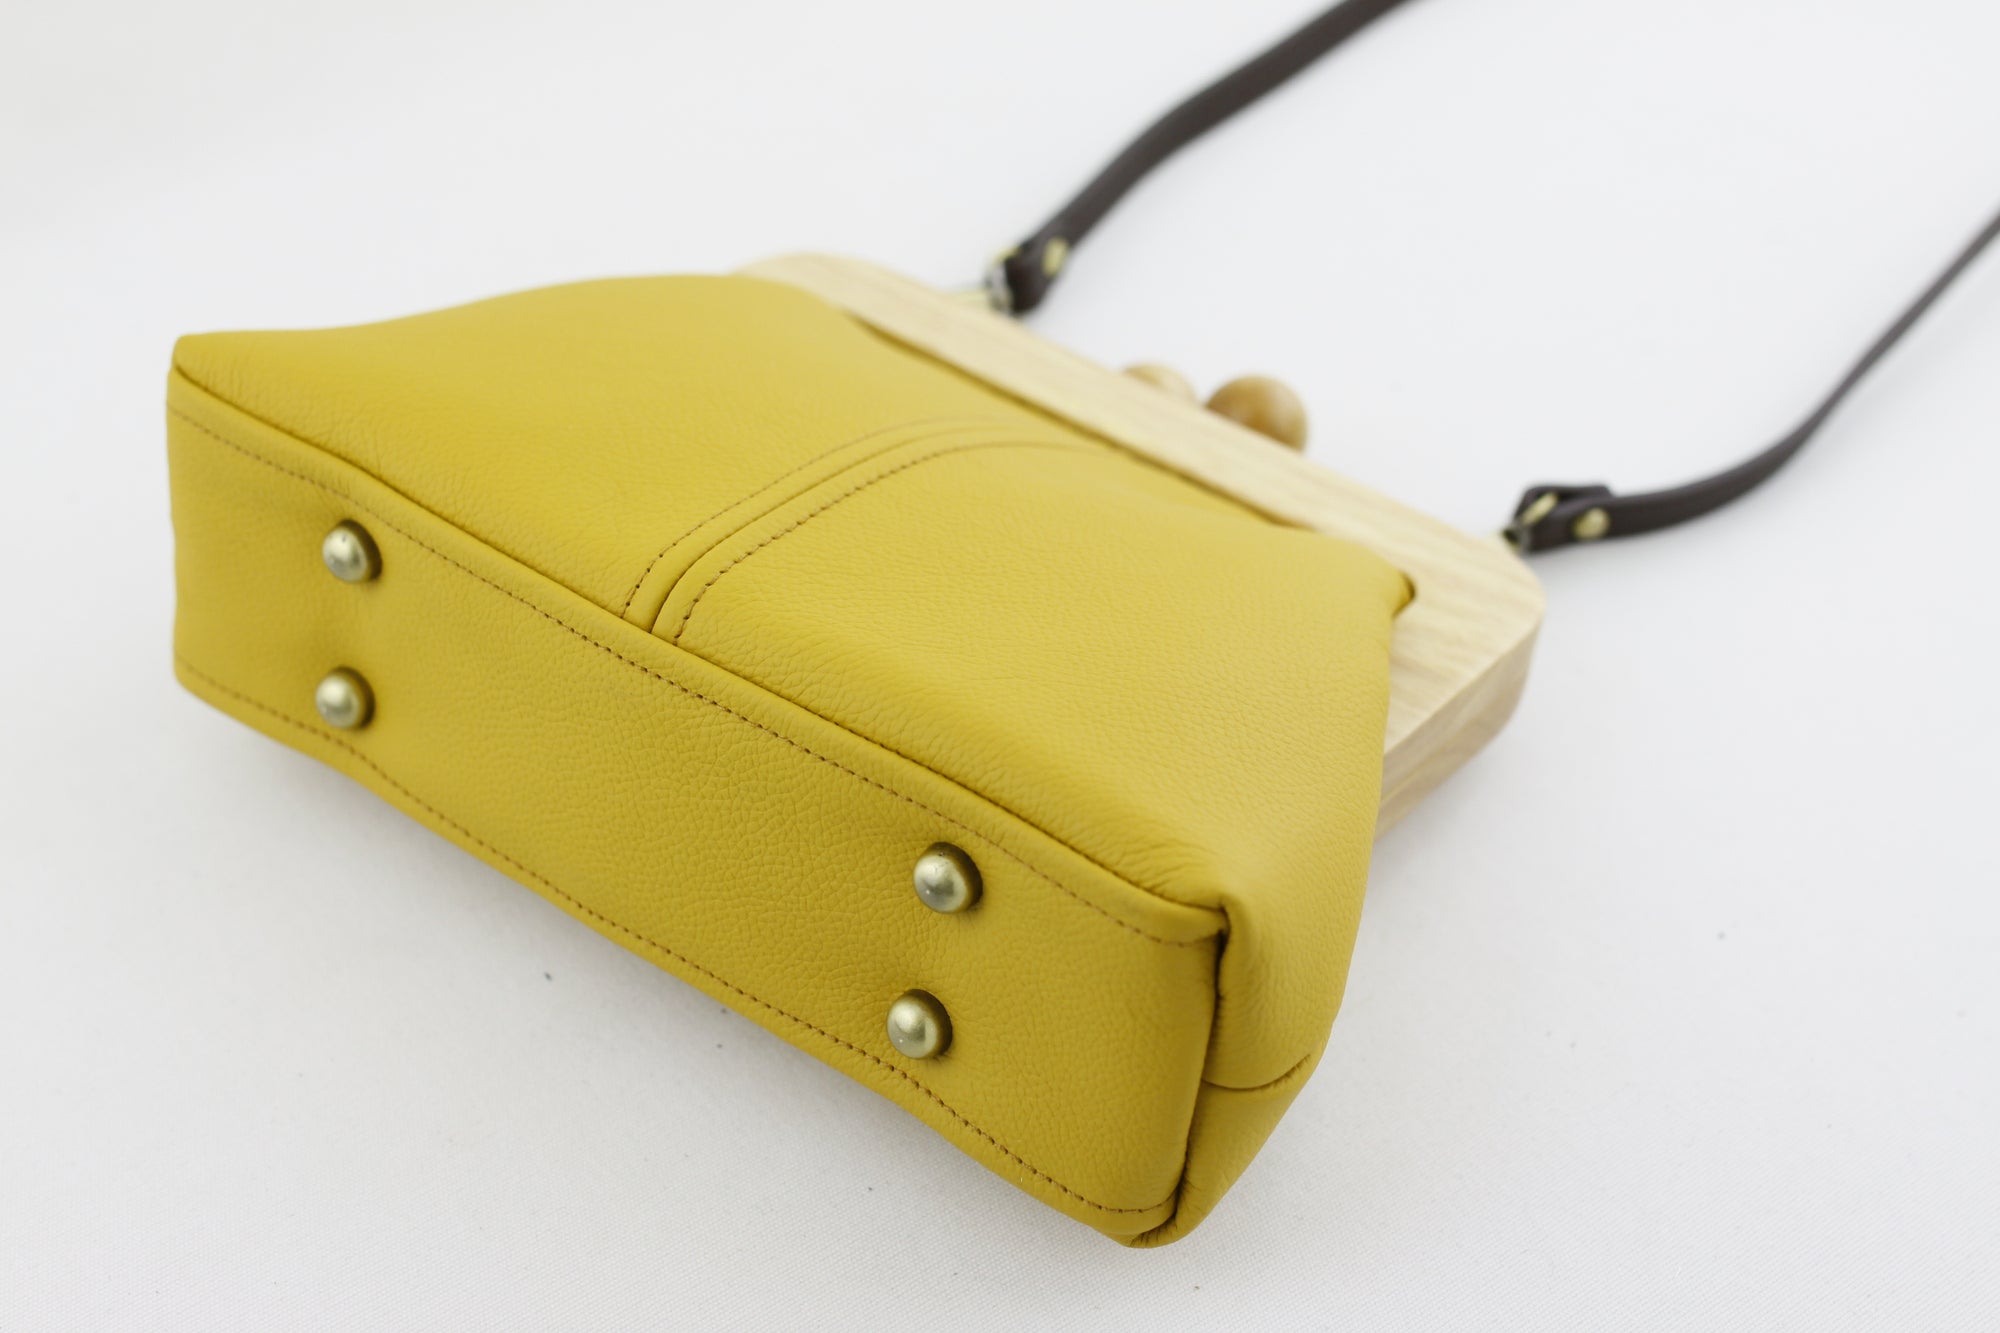 Mustard Genuine Leather Clutch Bag with Leather Strap | PINKOASIS